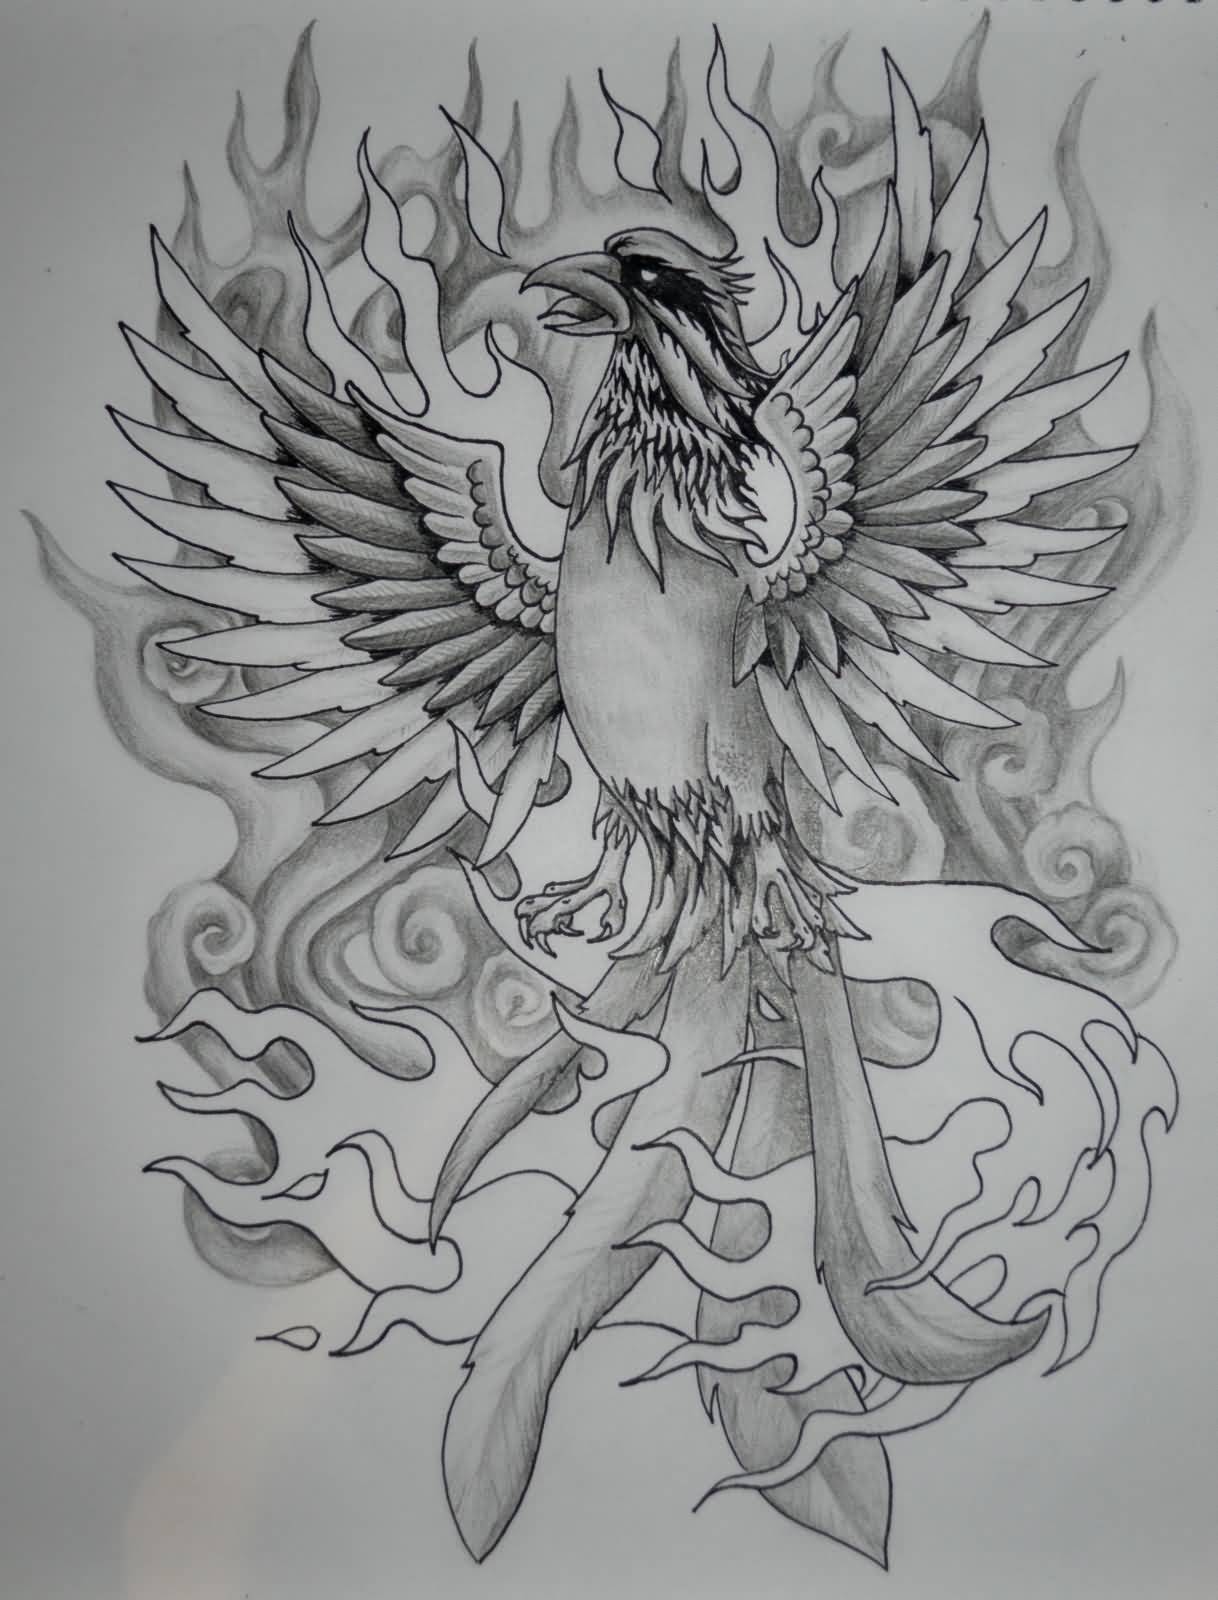 45 Rising Phoenix From The Ashes Tattoo. www.askideas.com. 